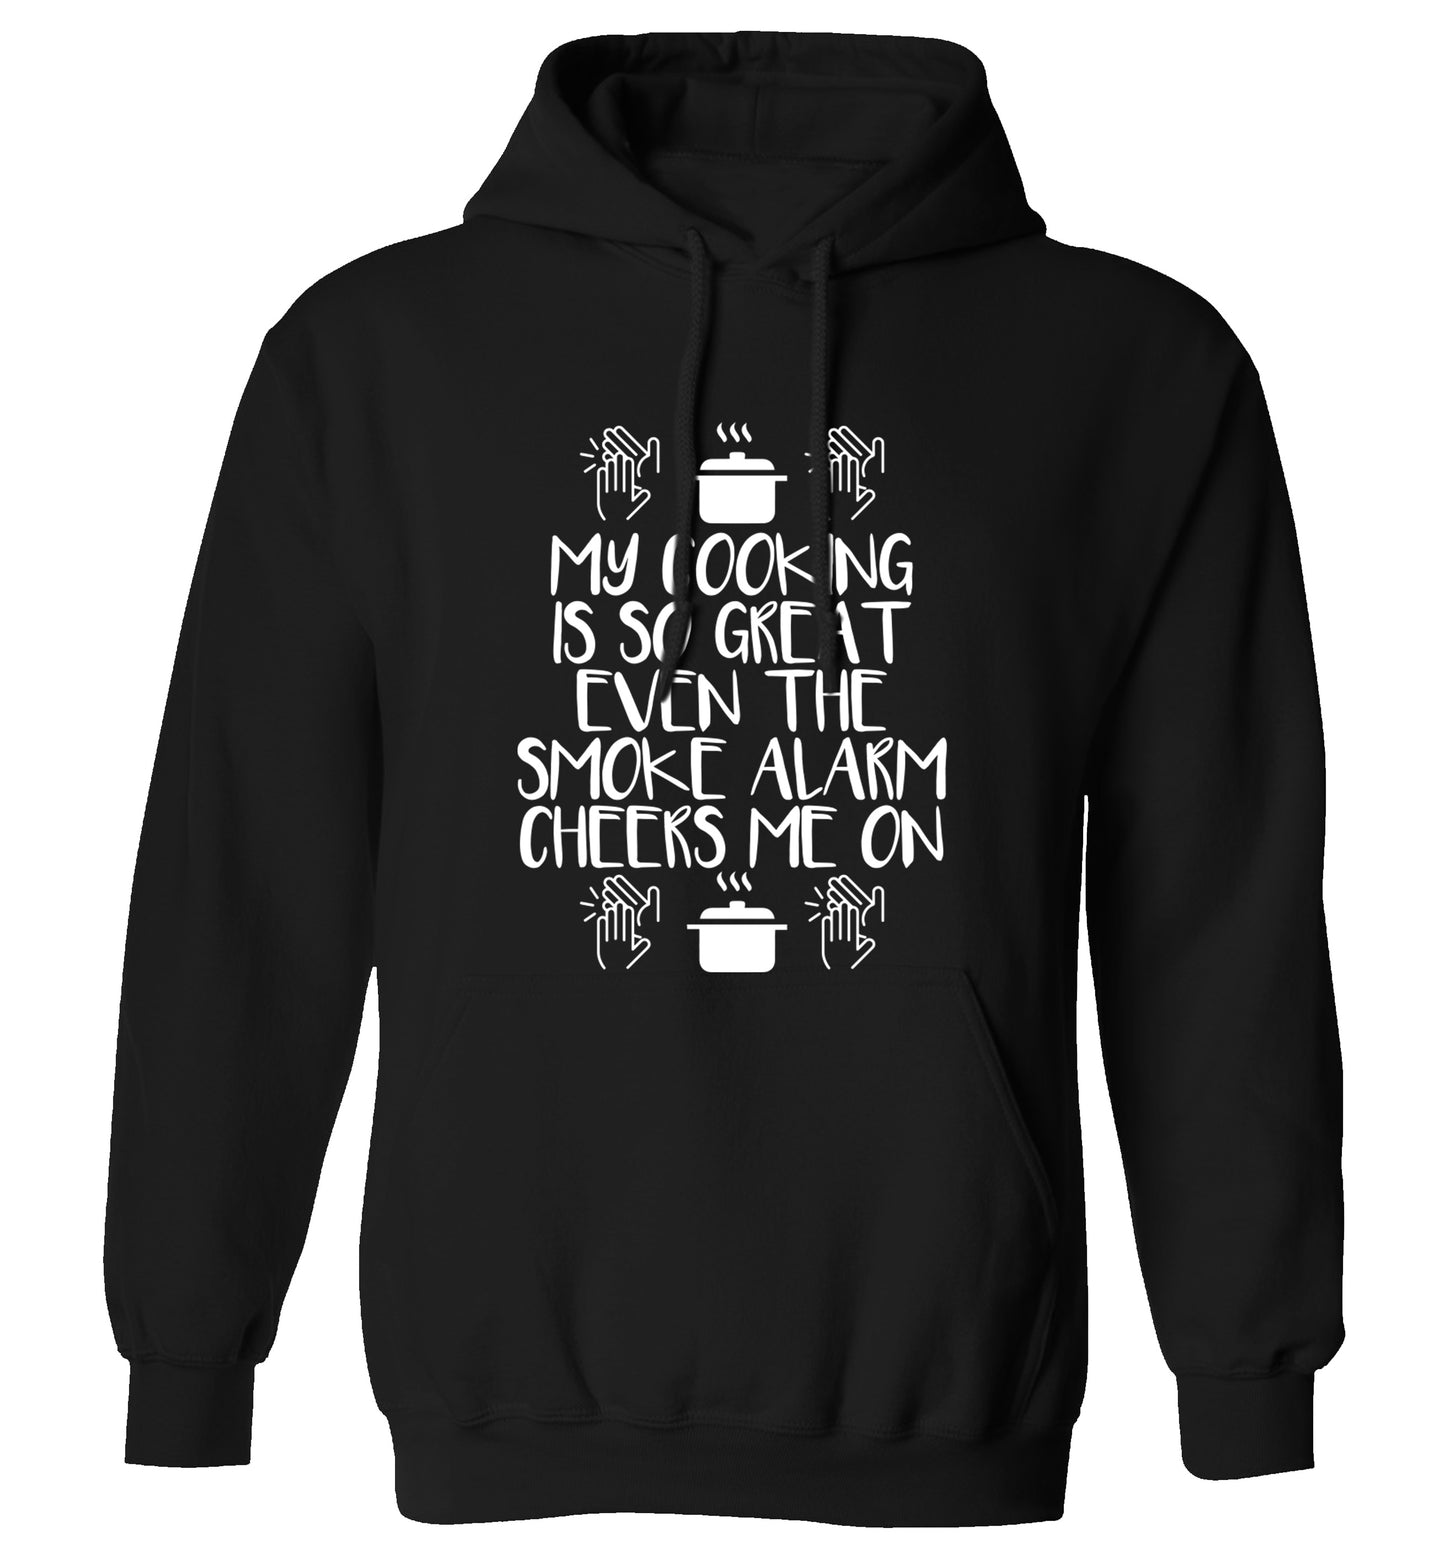 My cooking is so great even the smoke alarm cheers me on! adults unisex black hoodie 2XL